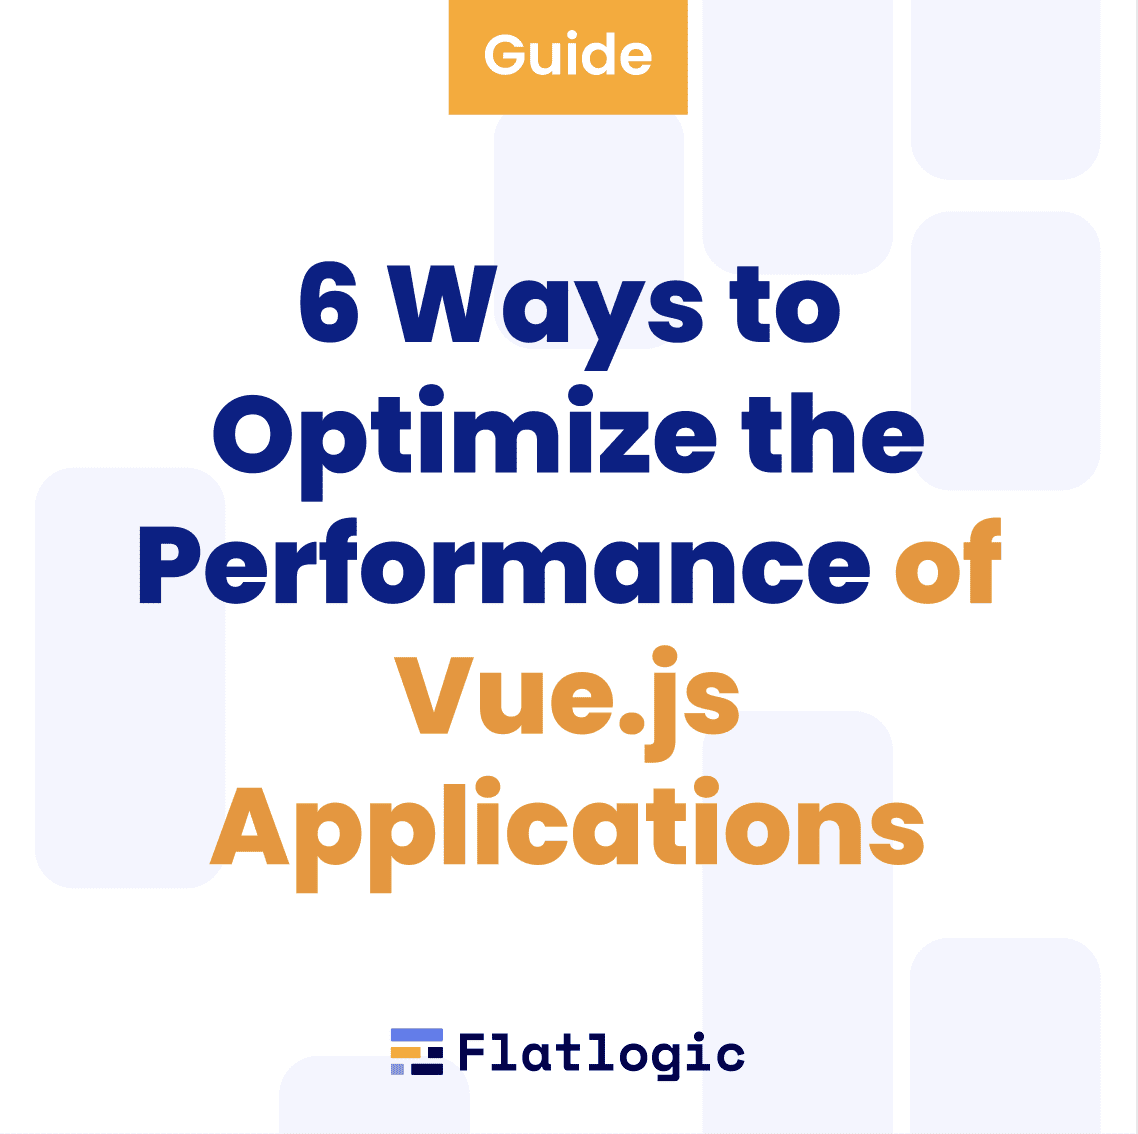 6 Ways to Optimize the Performance of Vue.js Applications